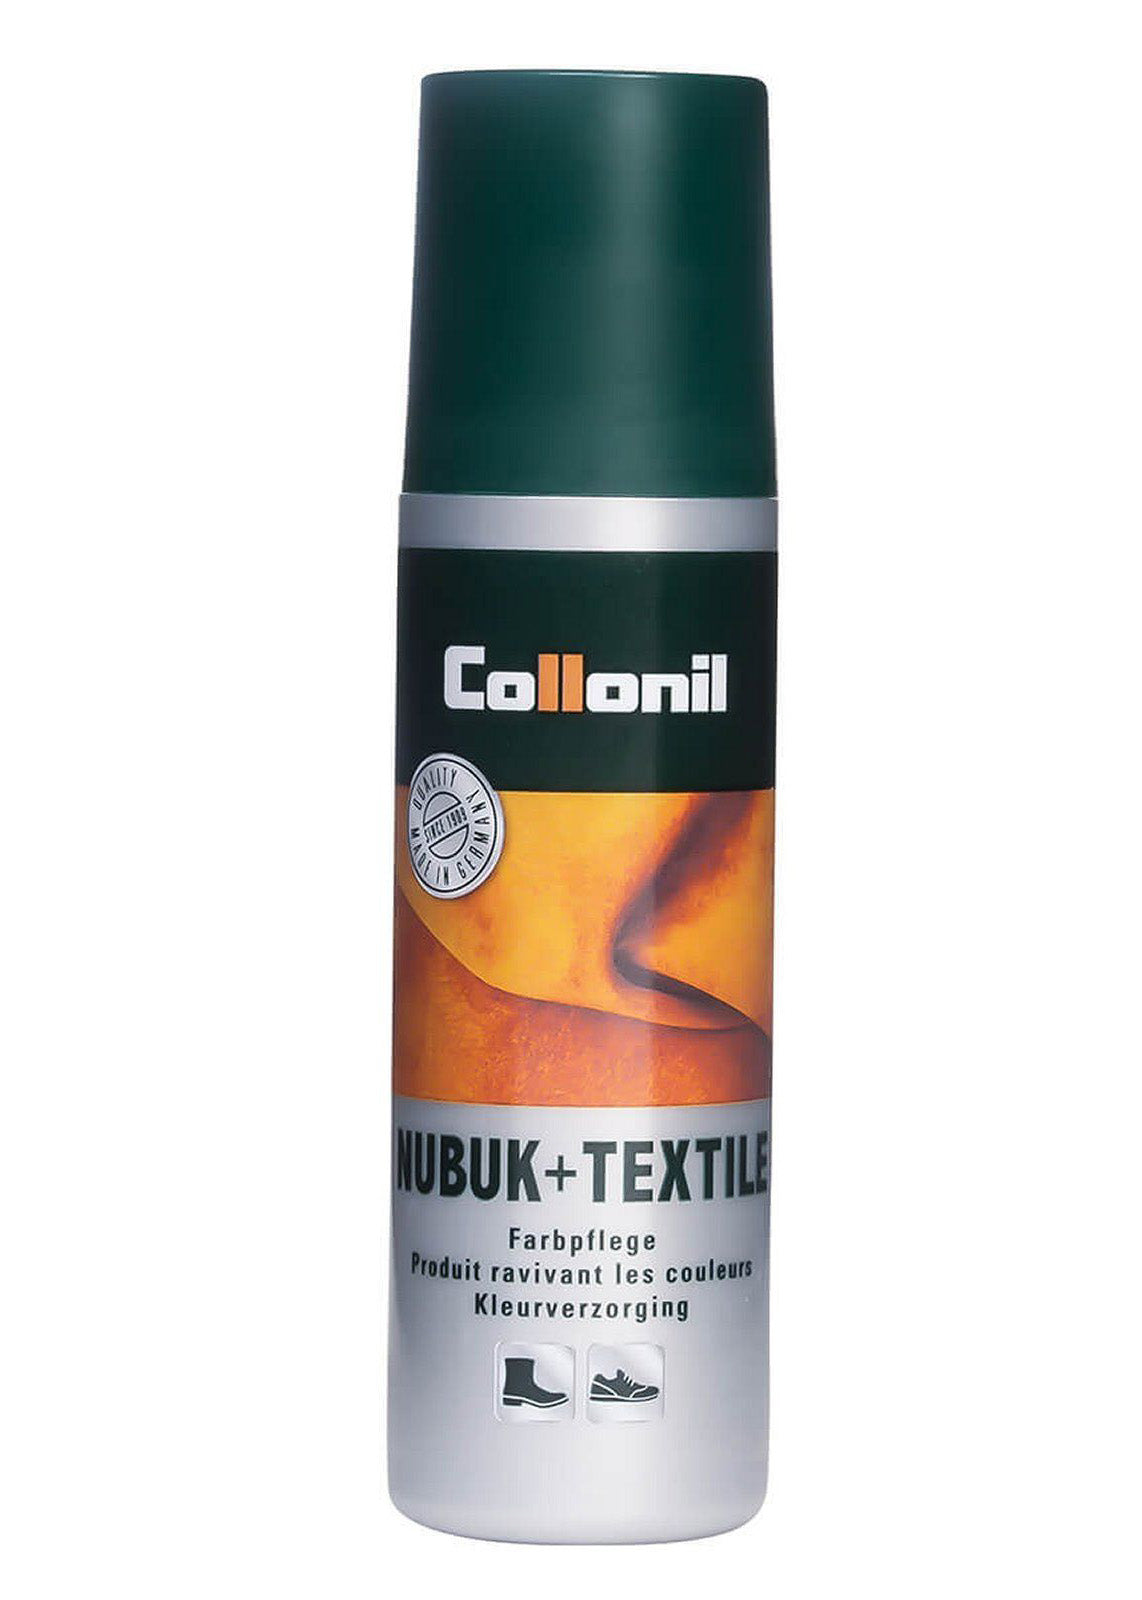 Collonil Nubuk+Textile - colorless, 100 ml, conditioner for textile, nubuck and suede leather